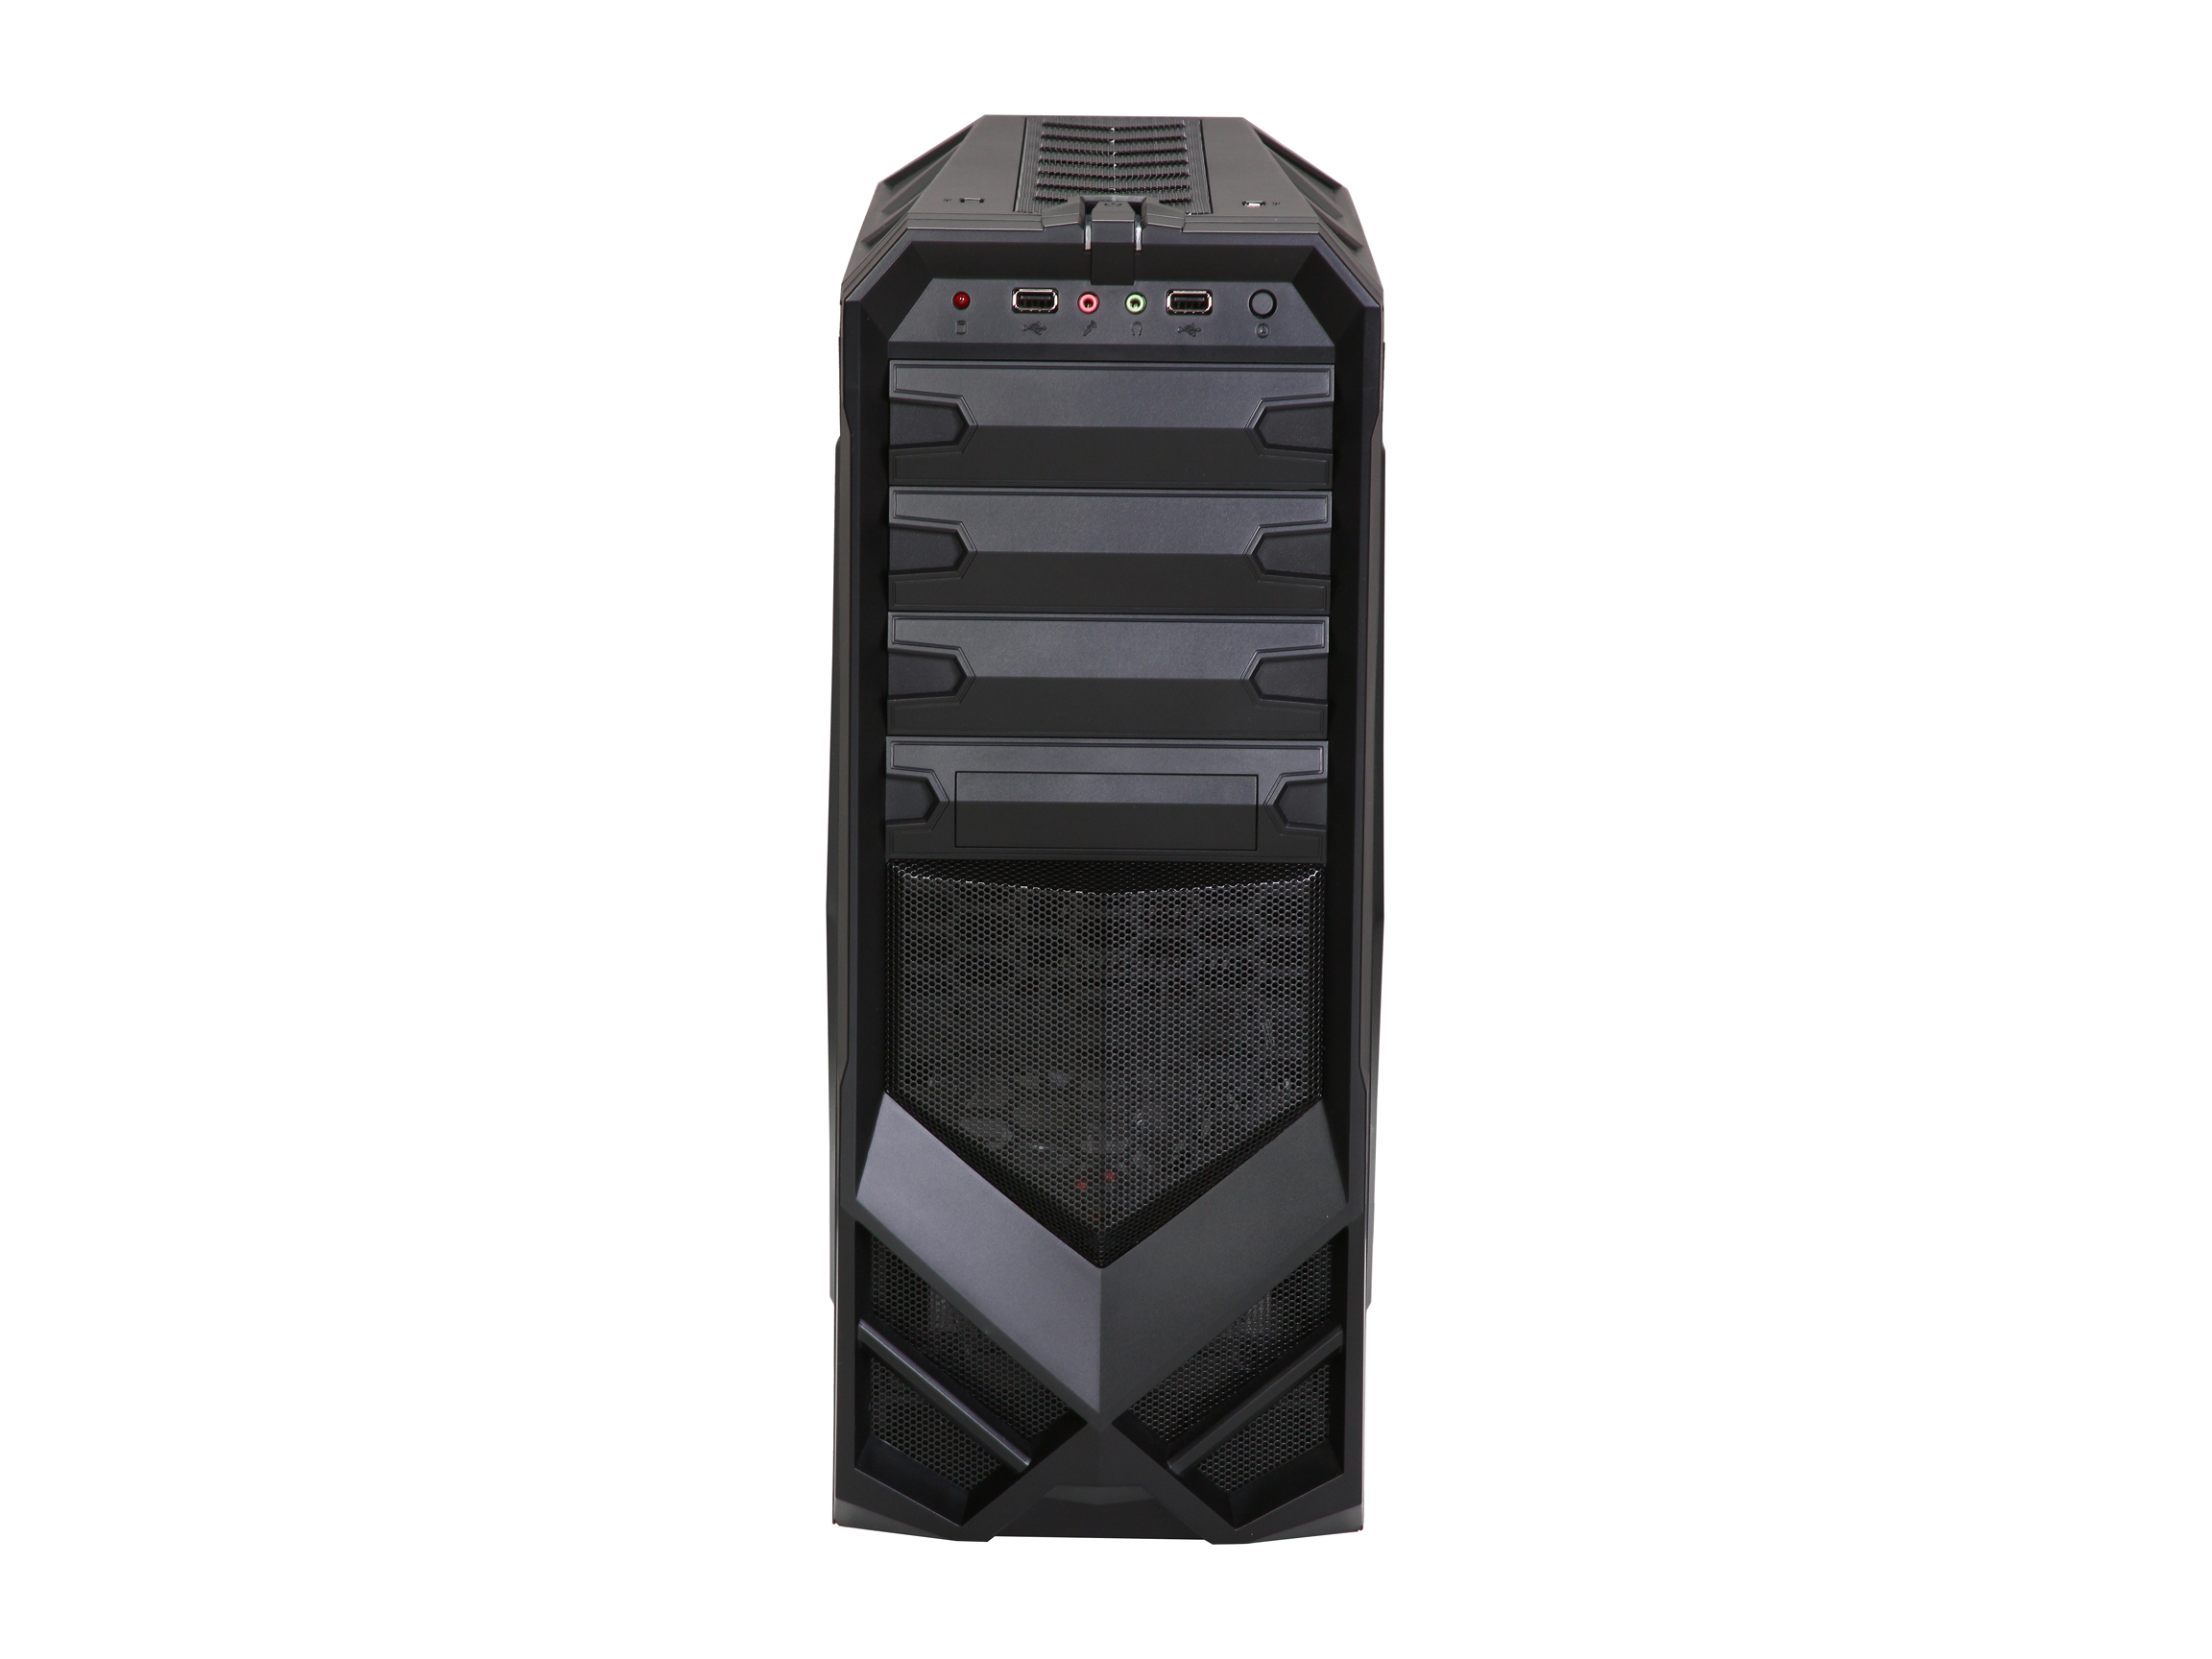 Rosewill Galaxy 01 ATX Mid Tower Black Gaming Computer Case